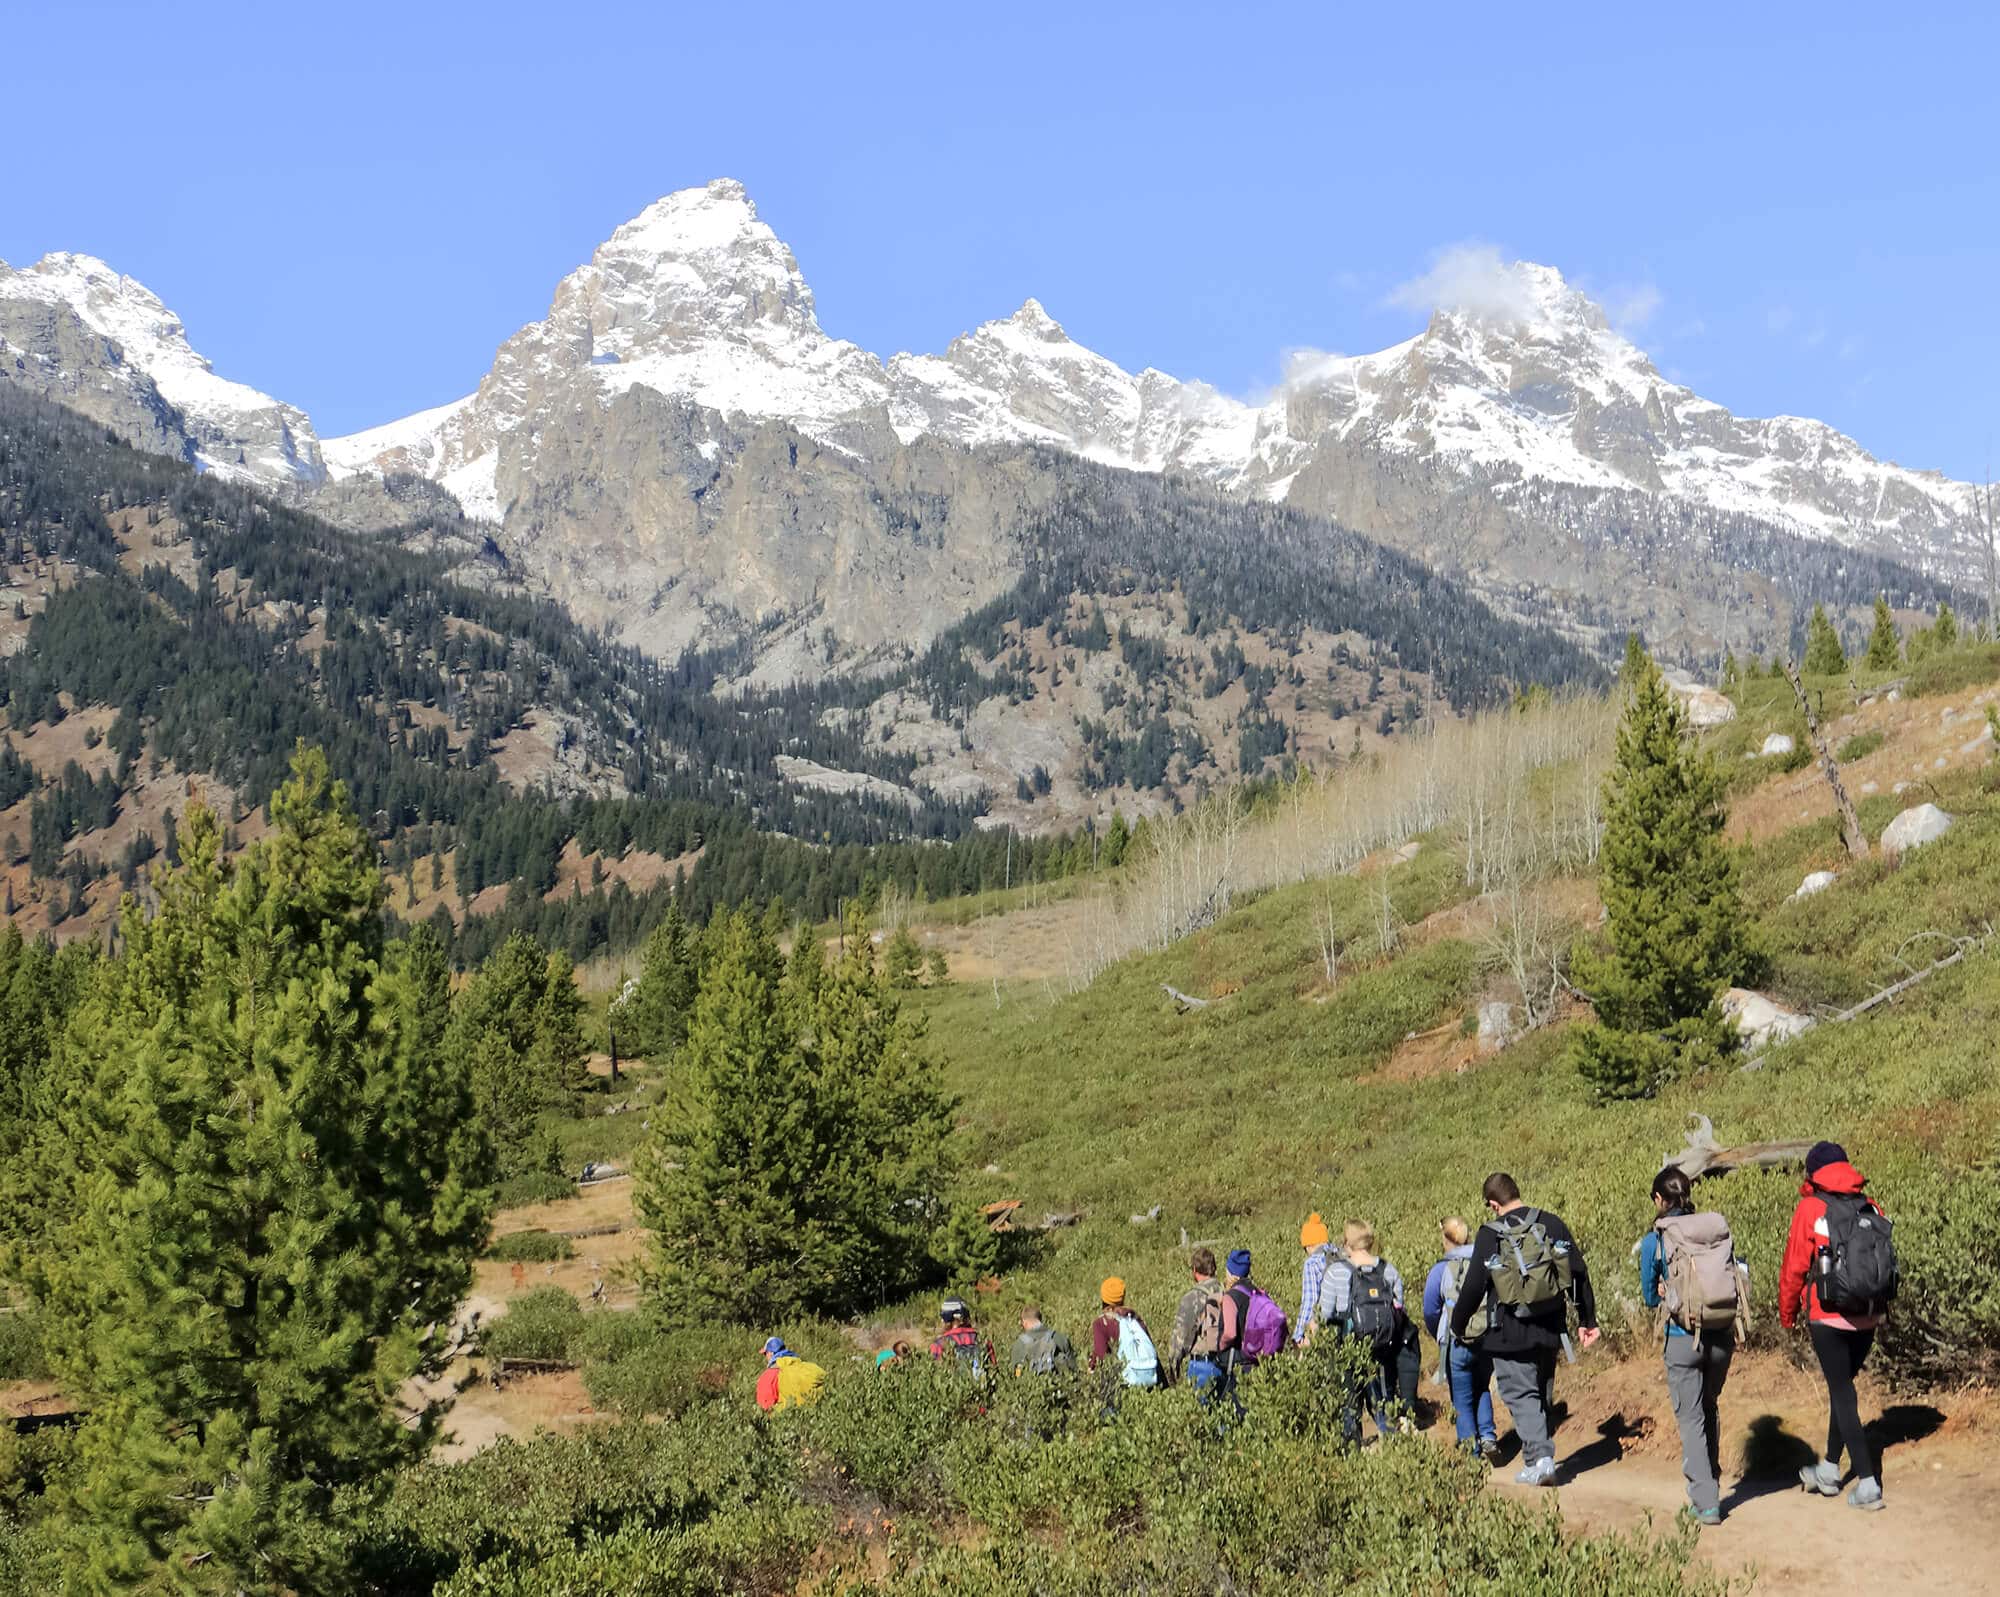 students hiking on a trail with Teton mountains in the distance